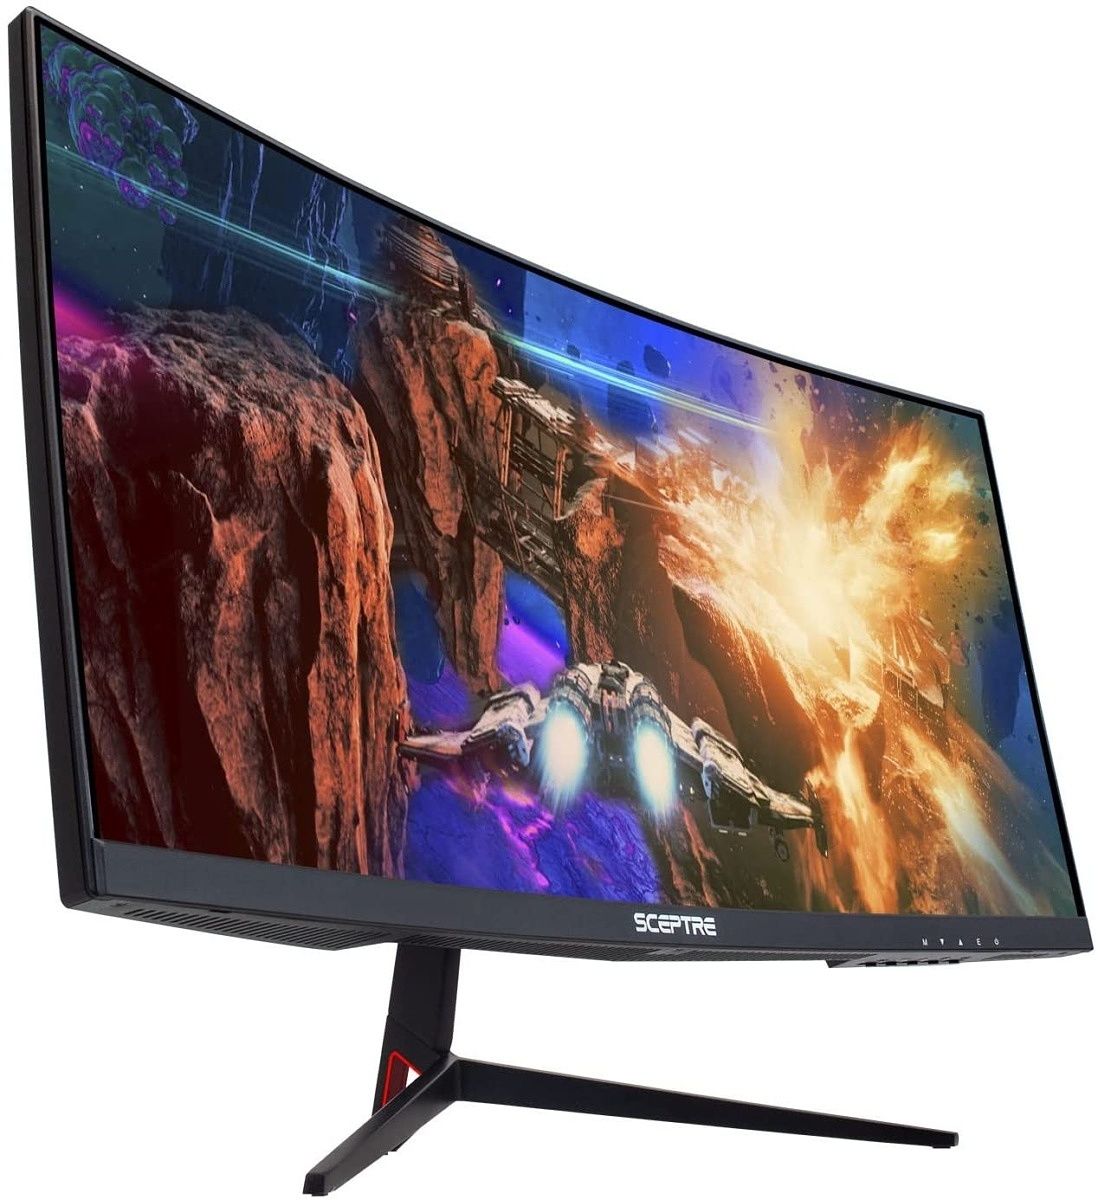 A 30-inch monitor with a 21:9 aspect ratio, Full HD resolution, and a 200Hz refresh rate. It has a 5ms response time and built-in speakers.